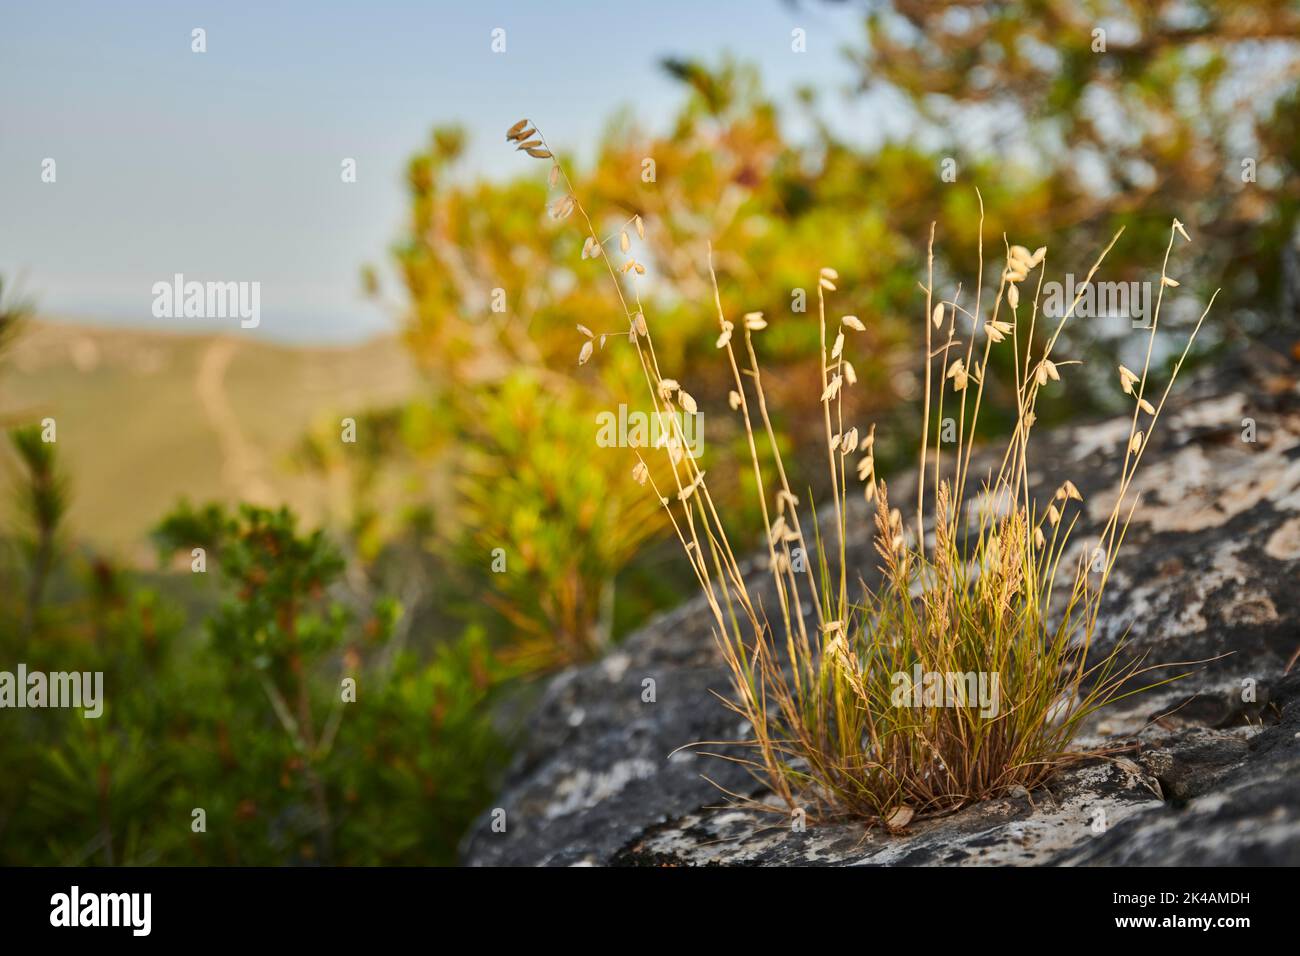 Sheep's fescue (Festuca ovina) growing at Mount 'La Talaia del Montmell' at evening, Catalonia, Spain Stock Photo